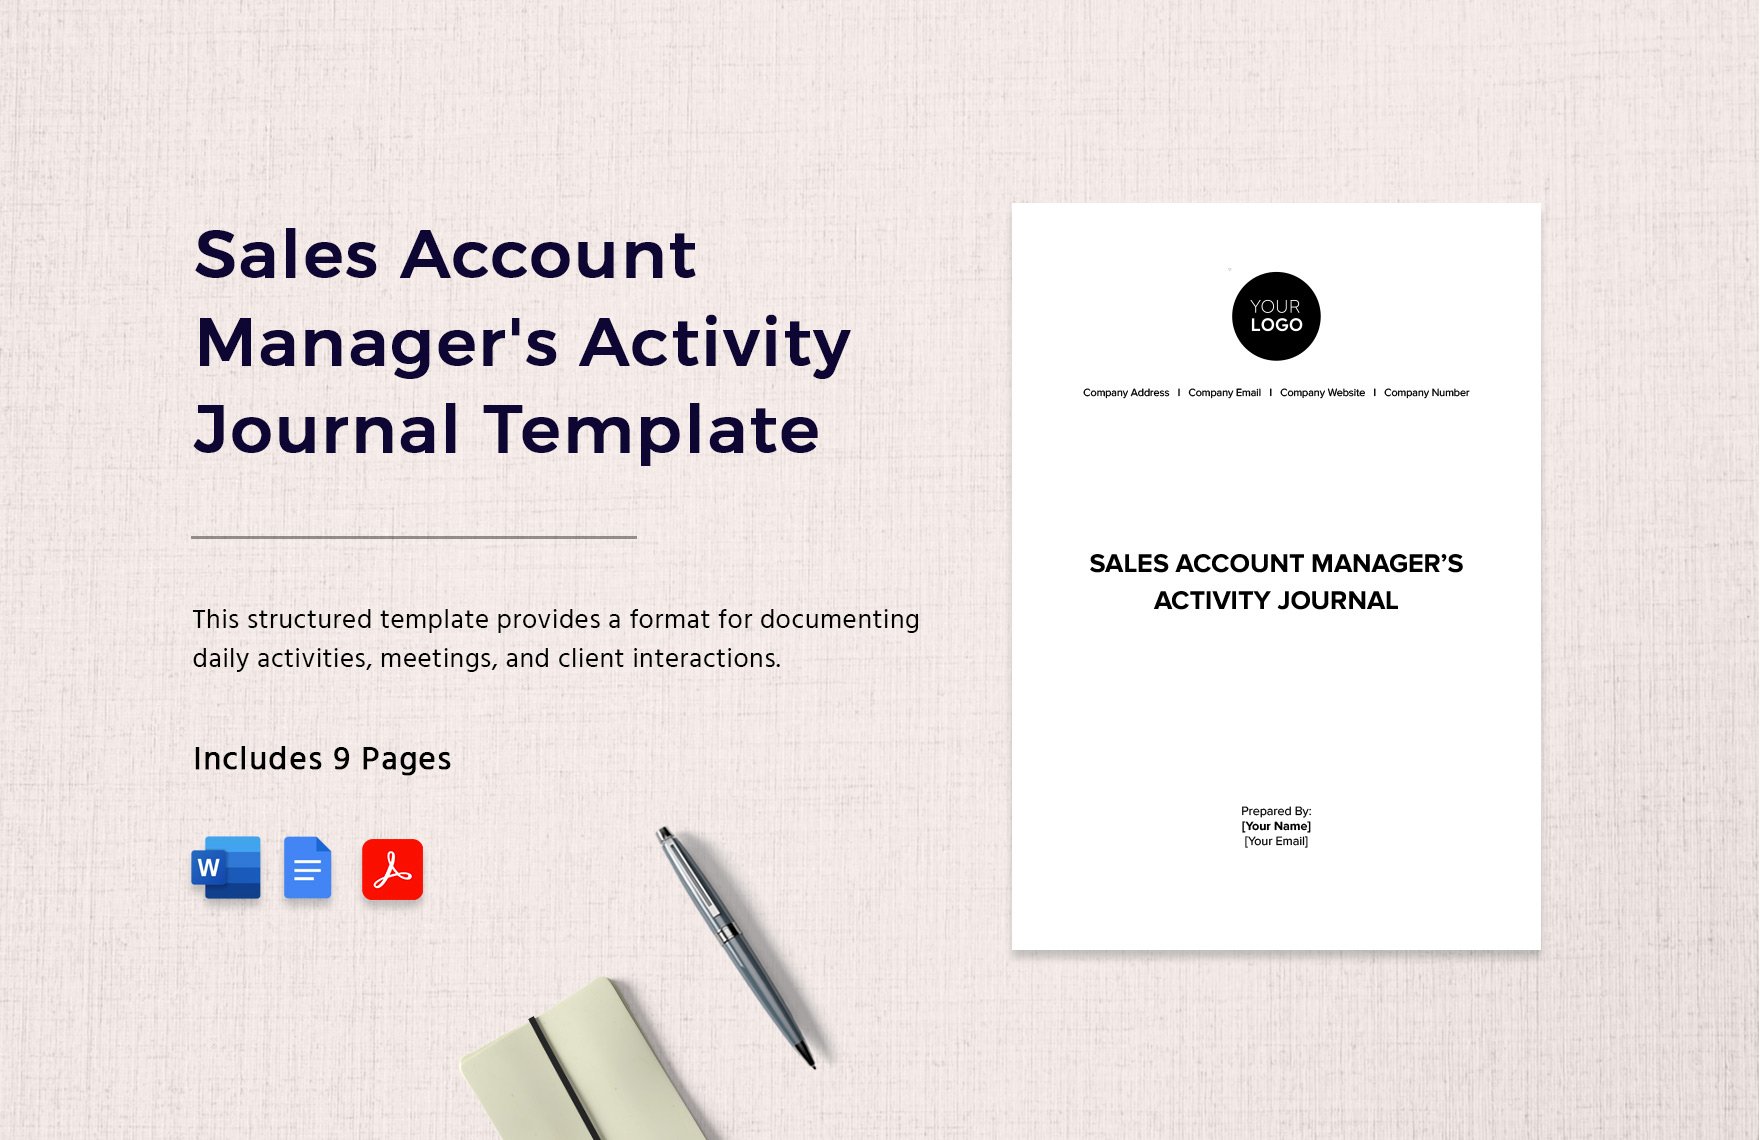 Sales Account Manager's Activity Journal Template